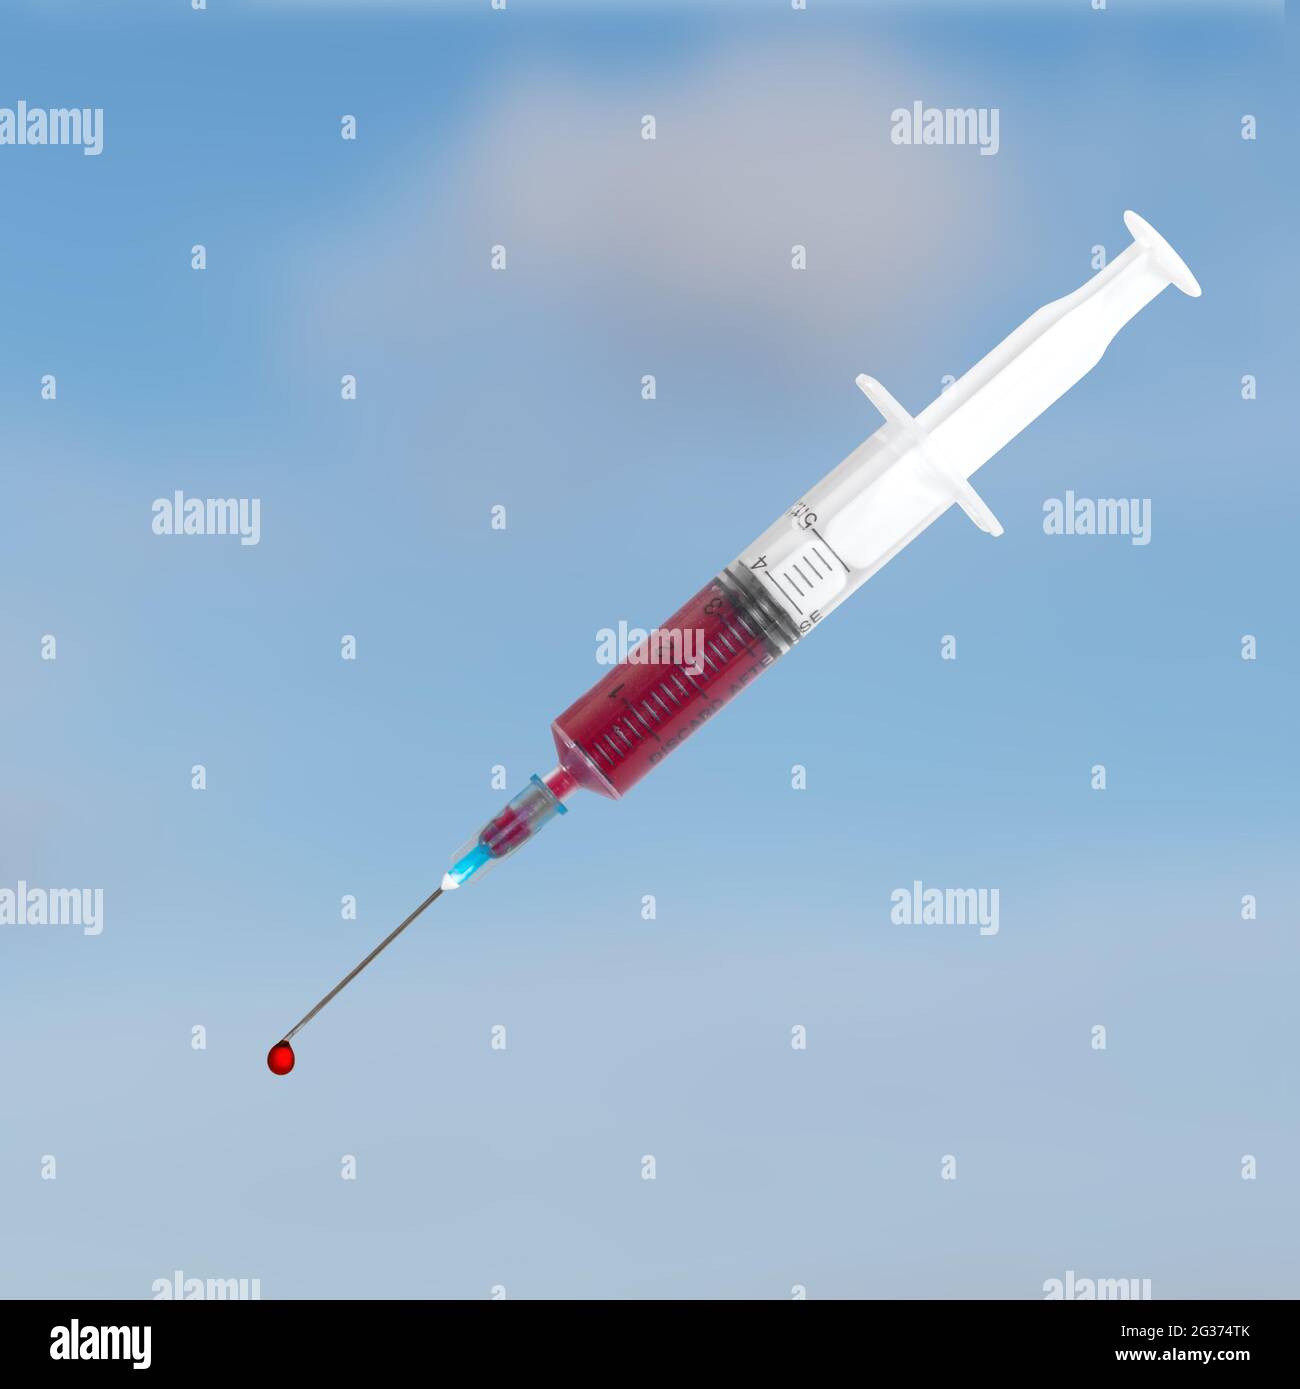 A single use syringe with blood and droplet over sky. Stock Photo